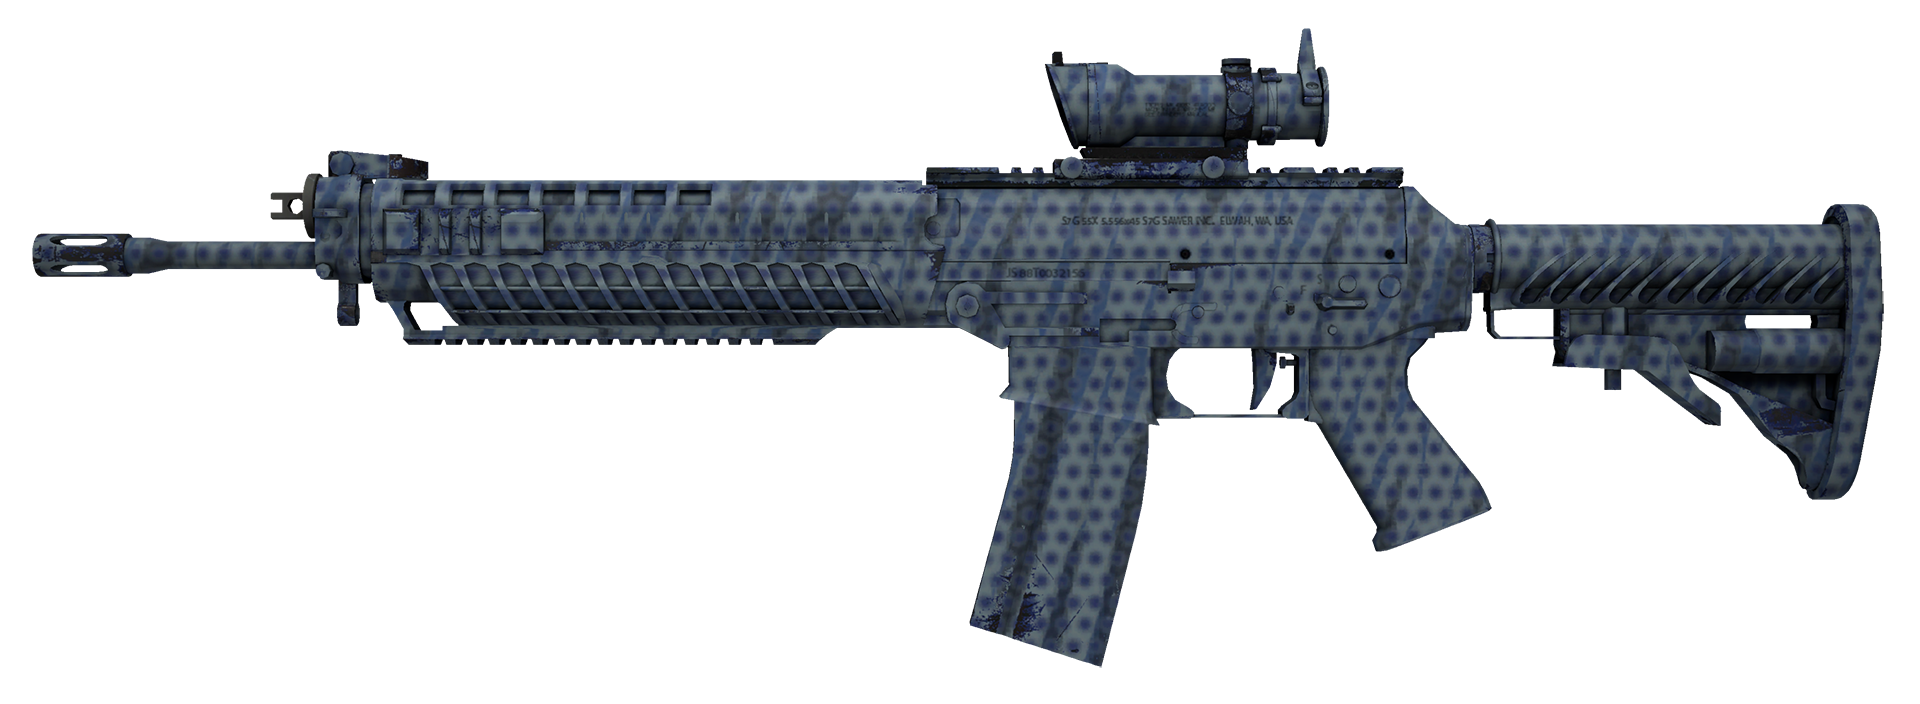 SG 553 Waves Perforated Large Rendering